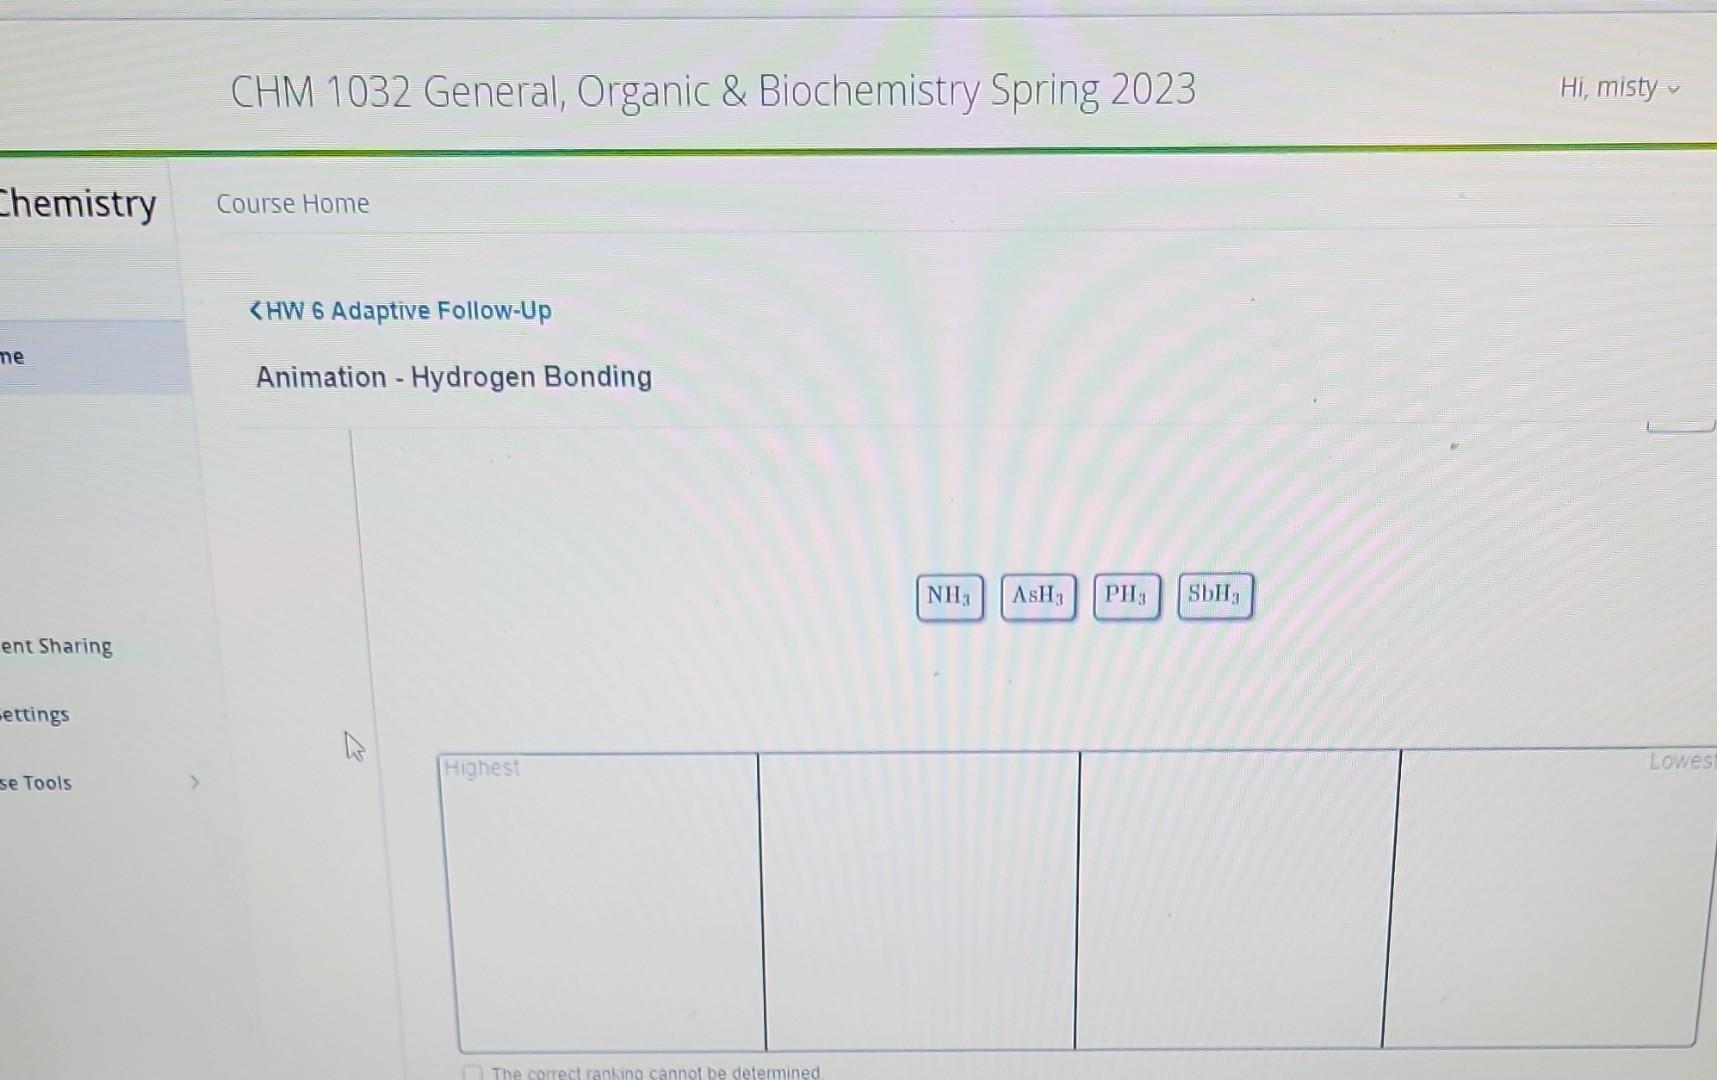 Spring 2023 Classes — Home